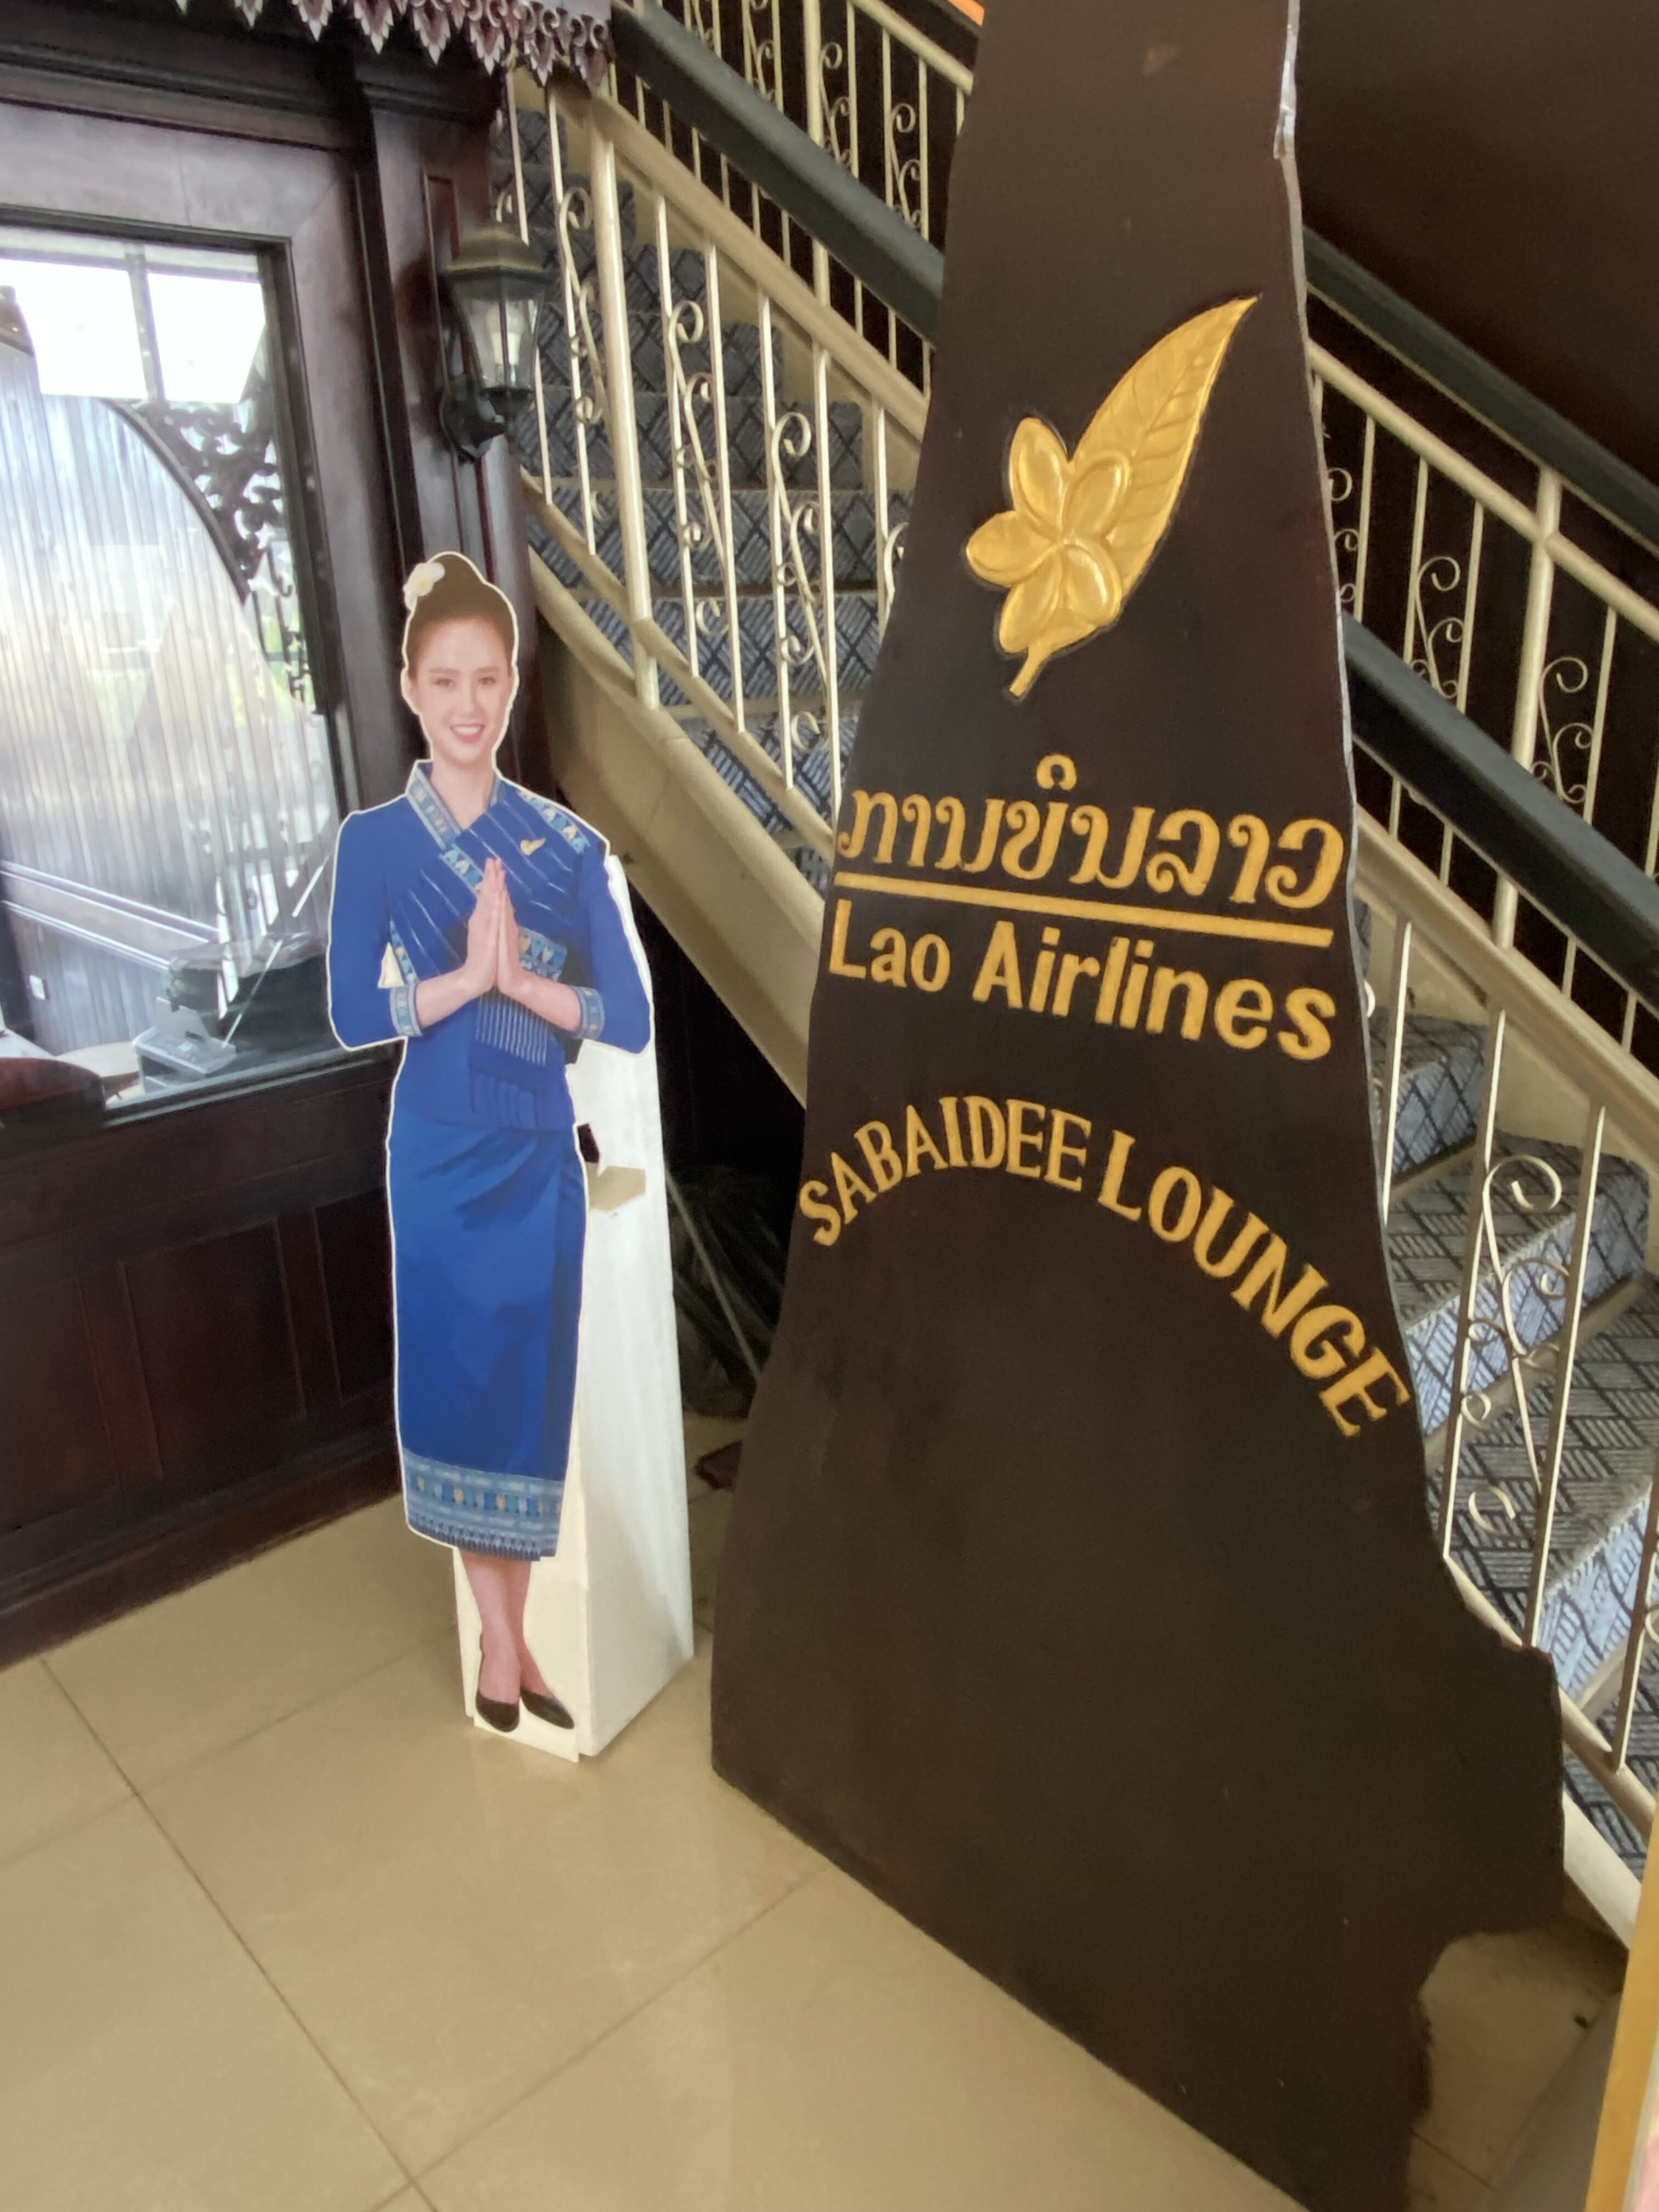 a cardboard cutout of a woman standing next to a sign